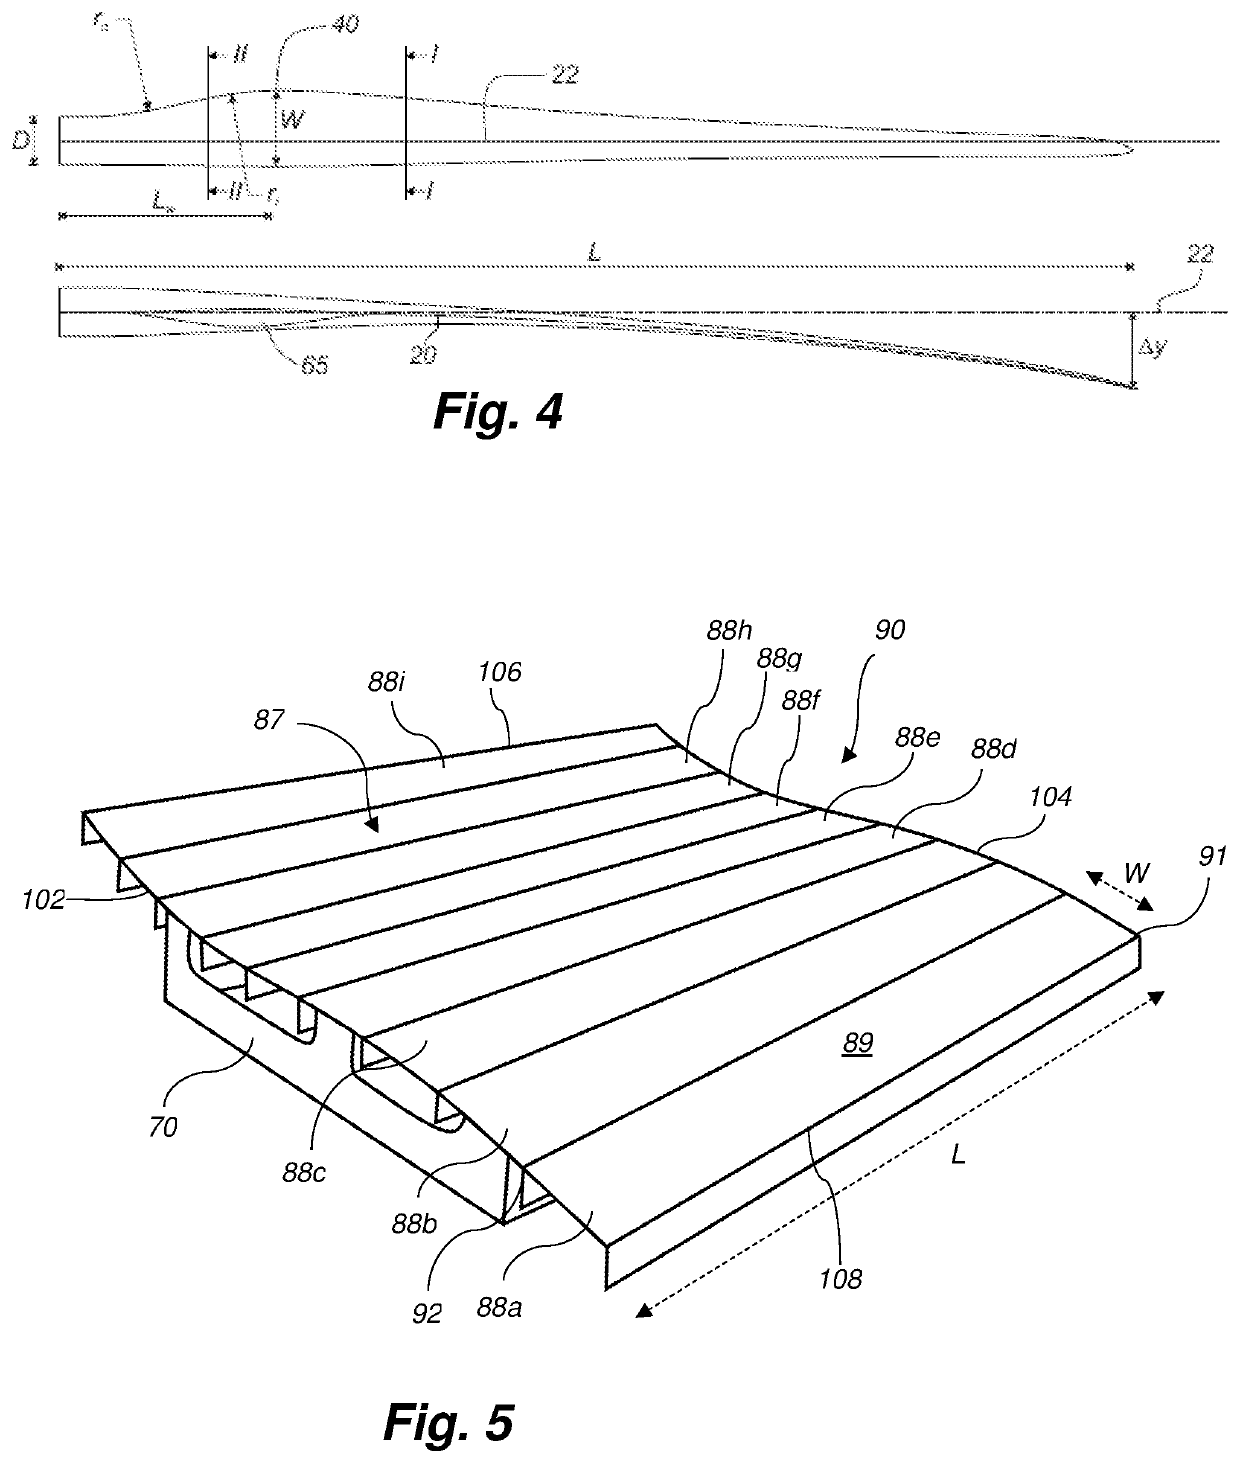 A flexible preform mould for manufacturing a preform for a wind turbine blade